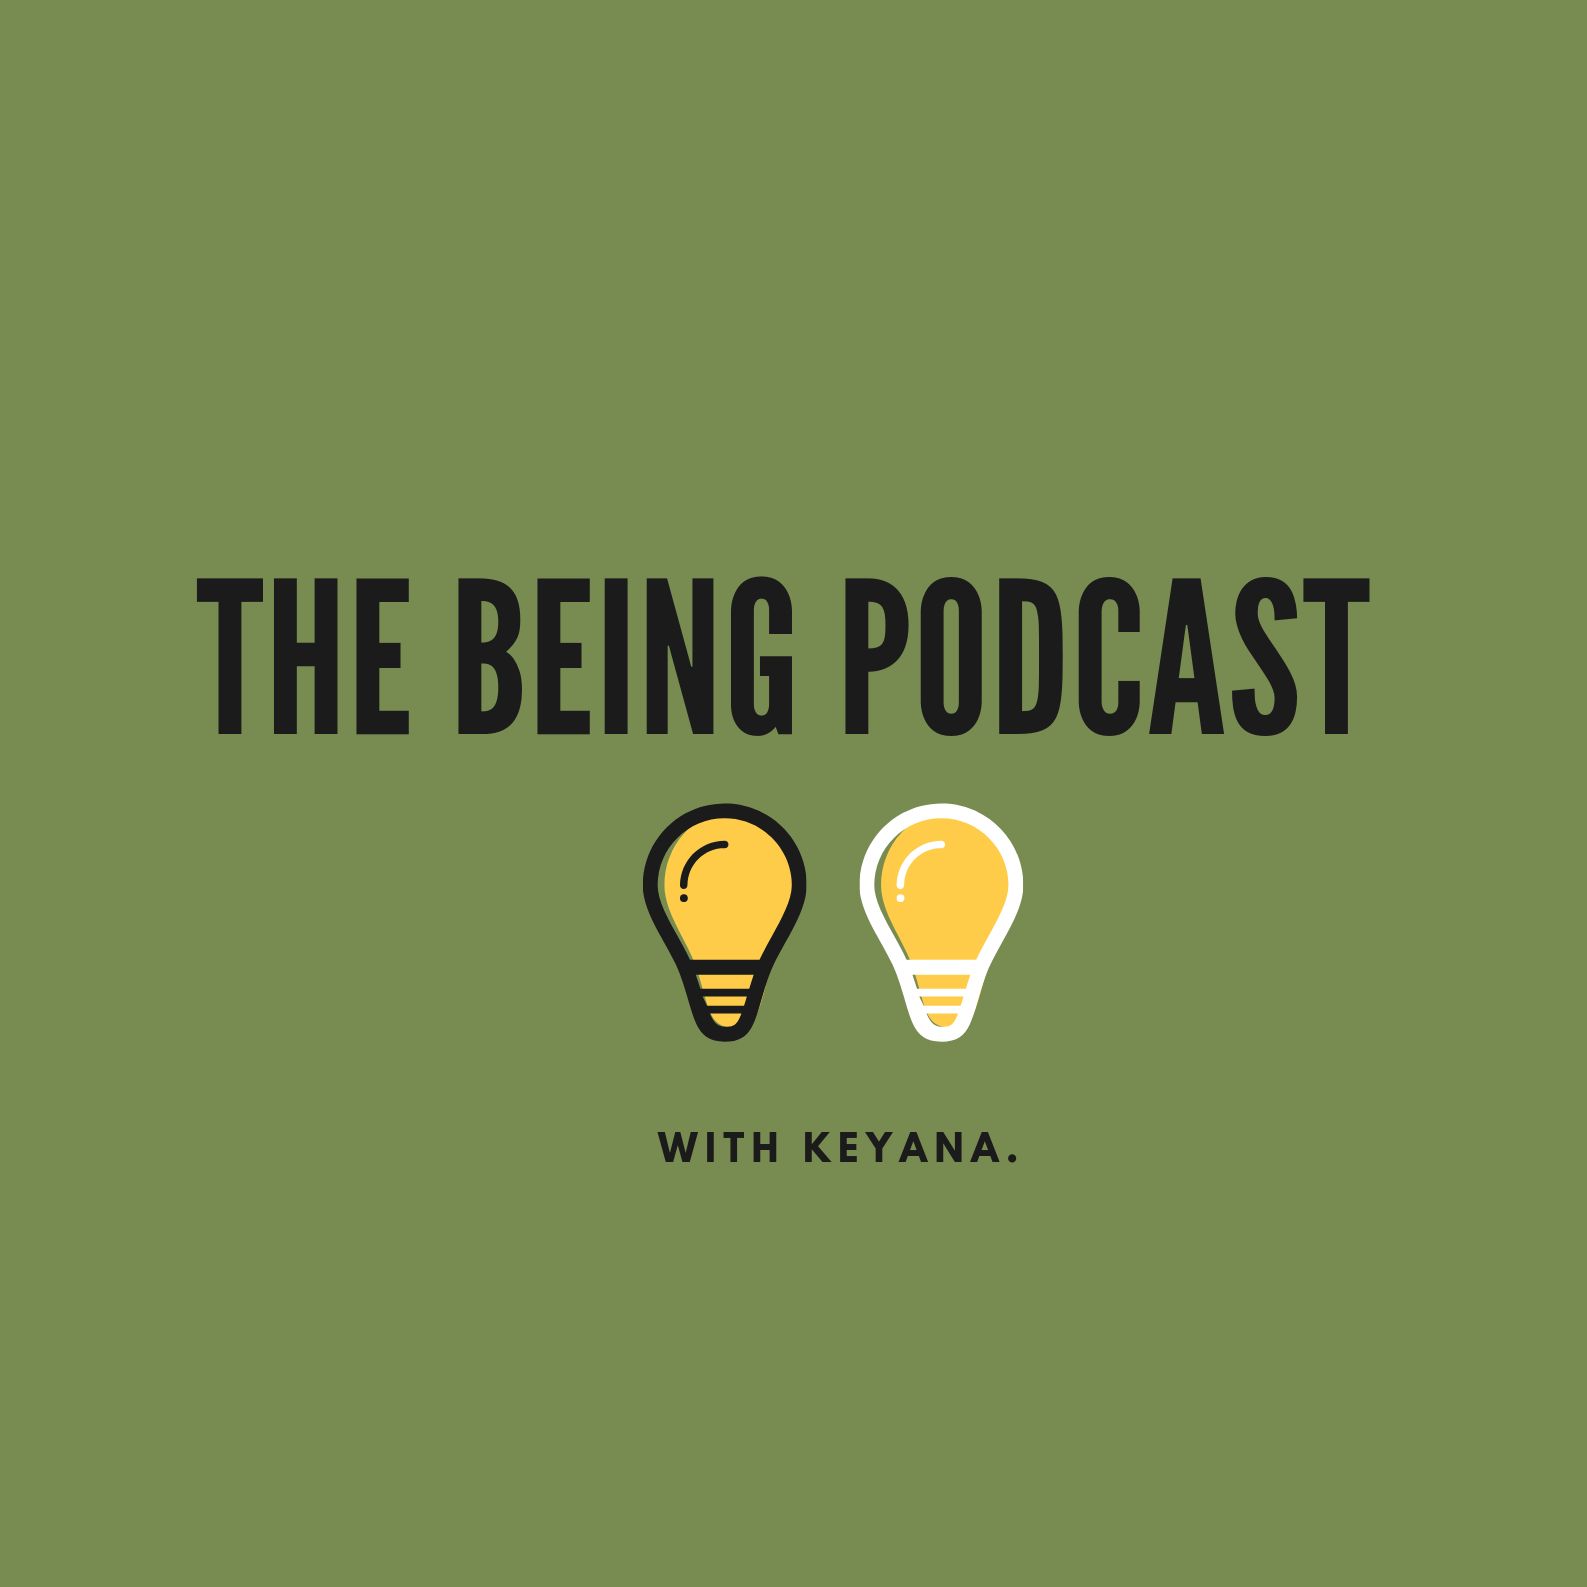 The Being Podcast